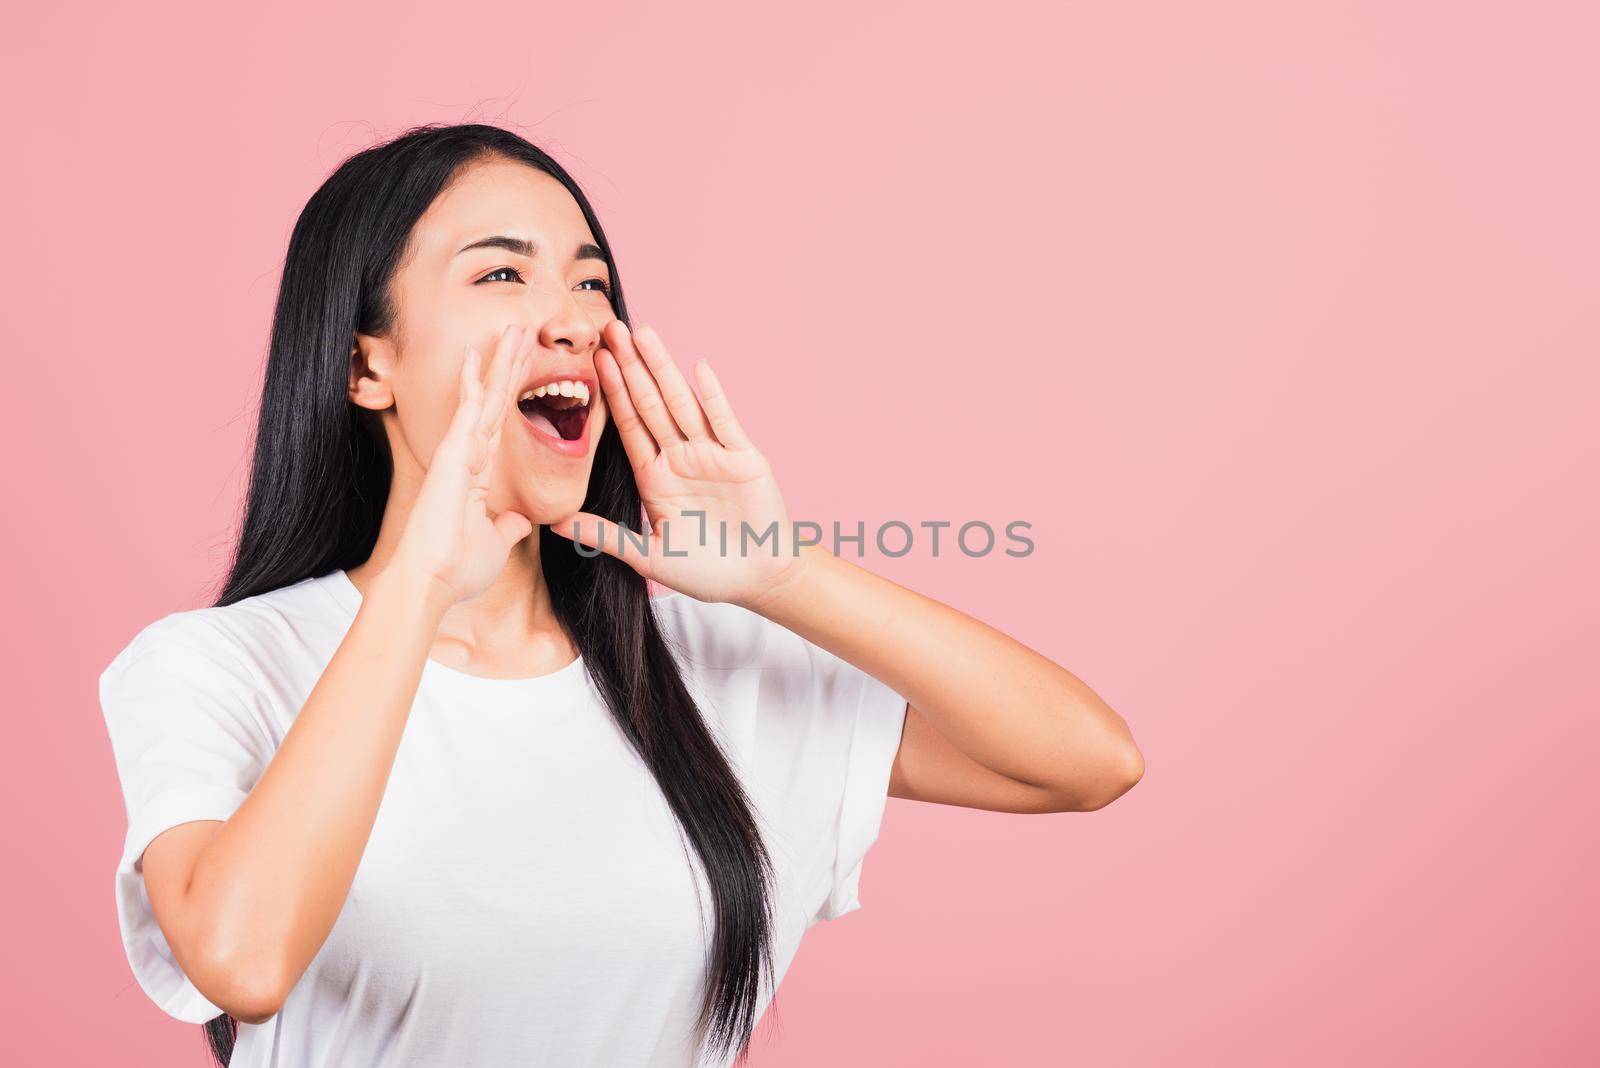 Asian happy portrait beautiful cute young woman teen standing hand on mouth talking news announcement studio shot isolated on pink background, Thai female looking to side away with copy space